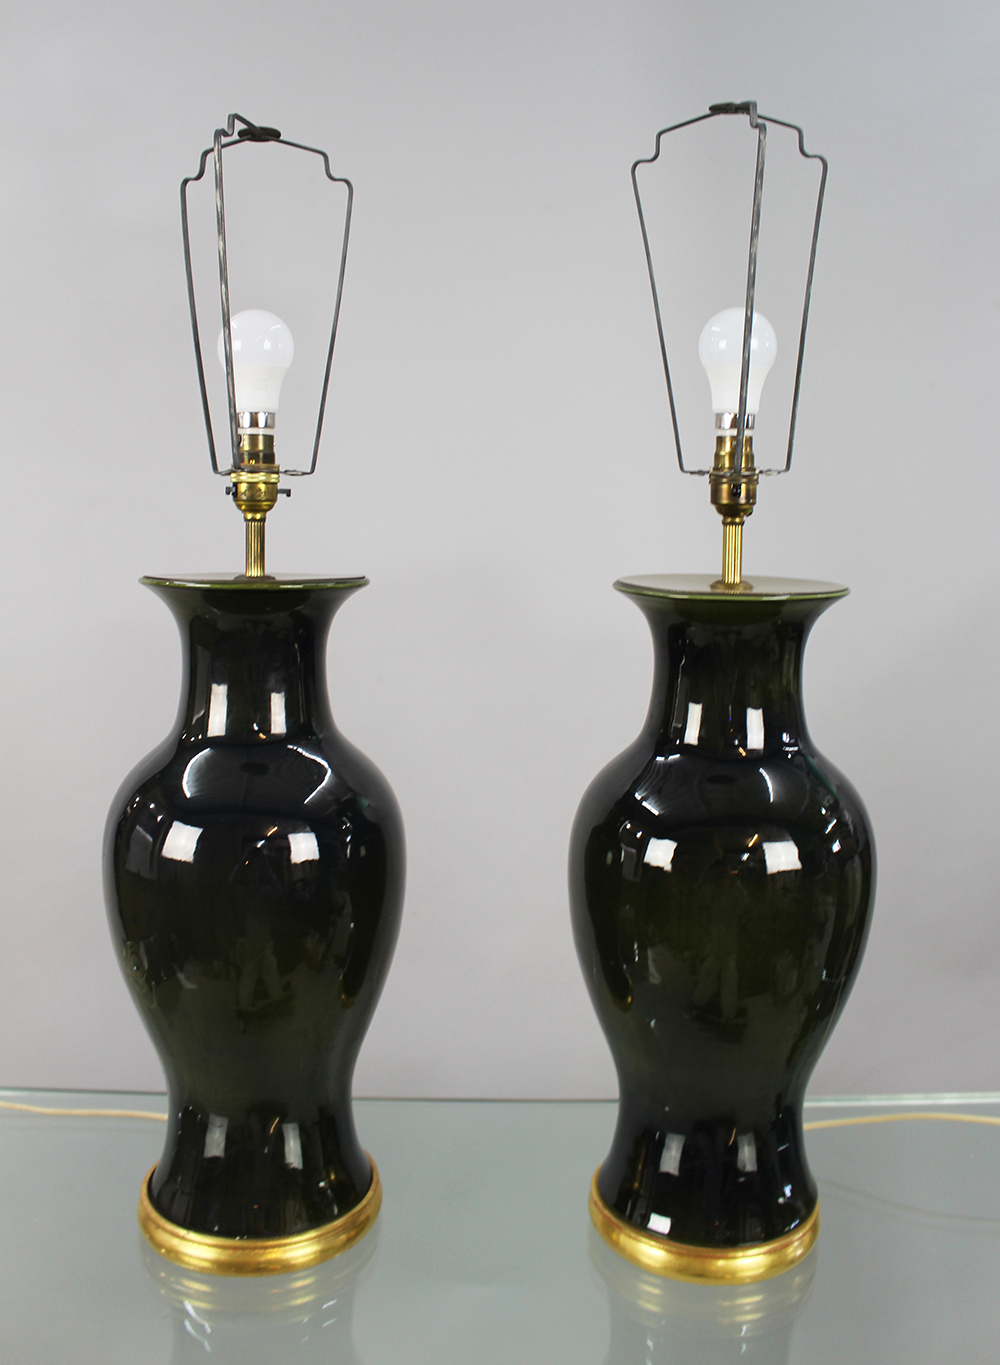 Pair of Vintage Ceramic & Gilt Table Lamps